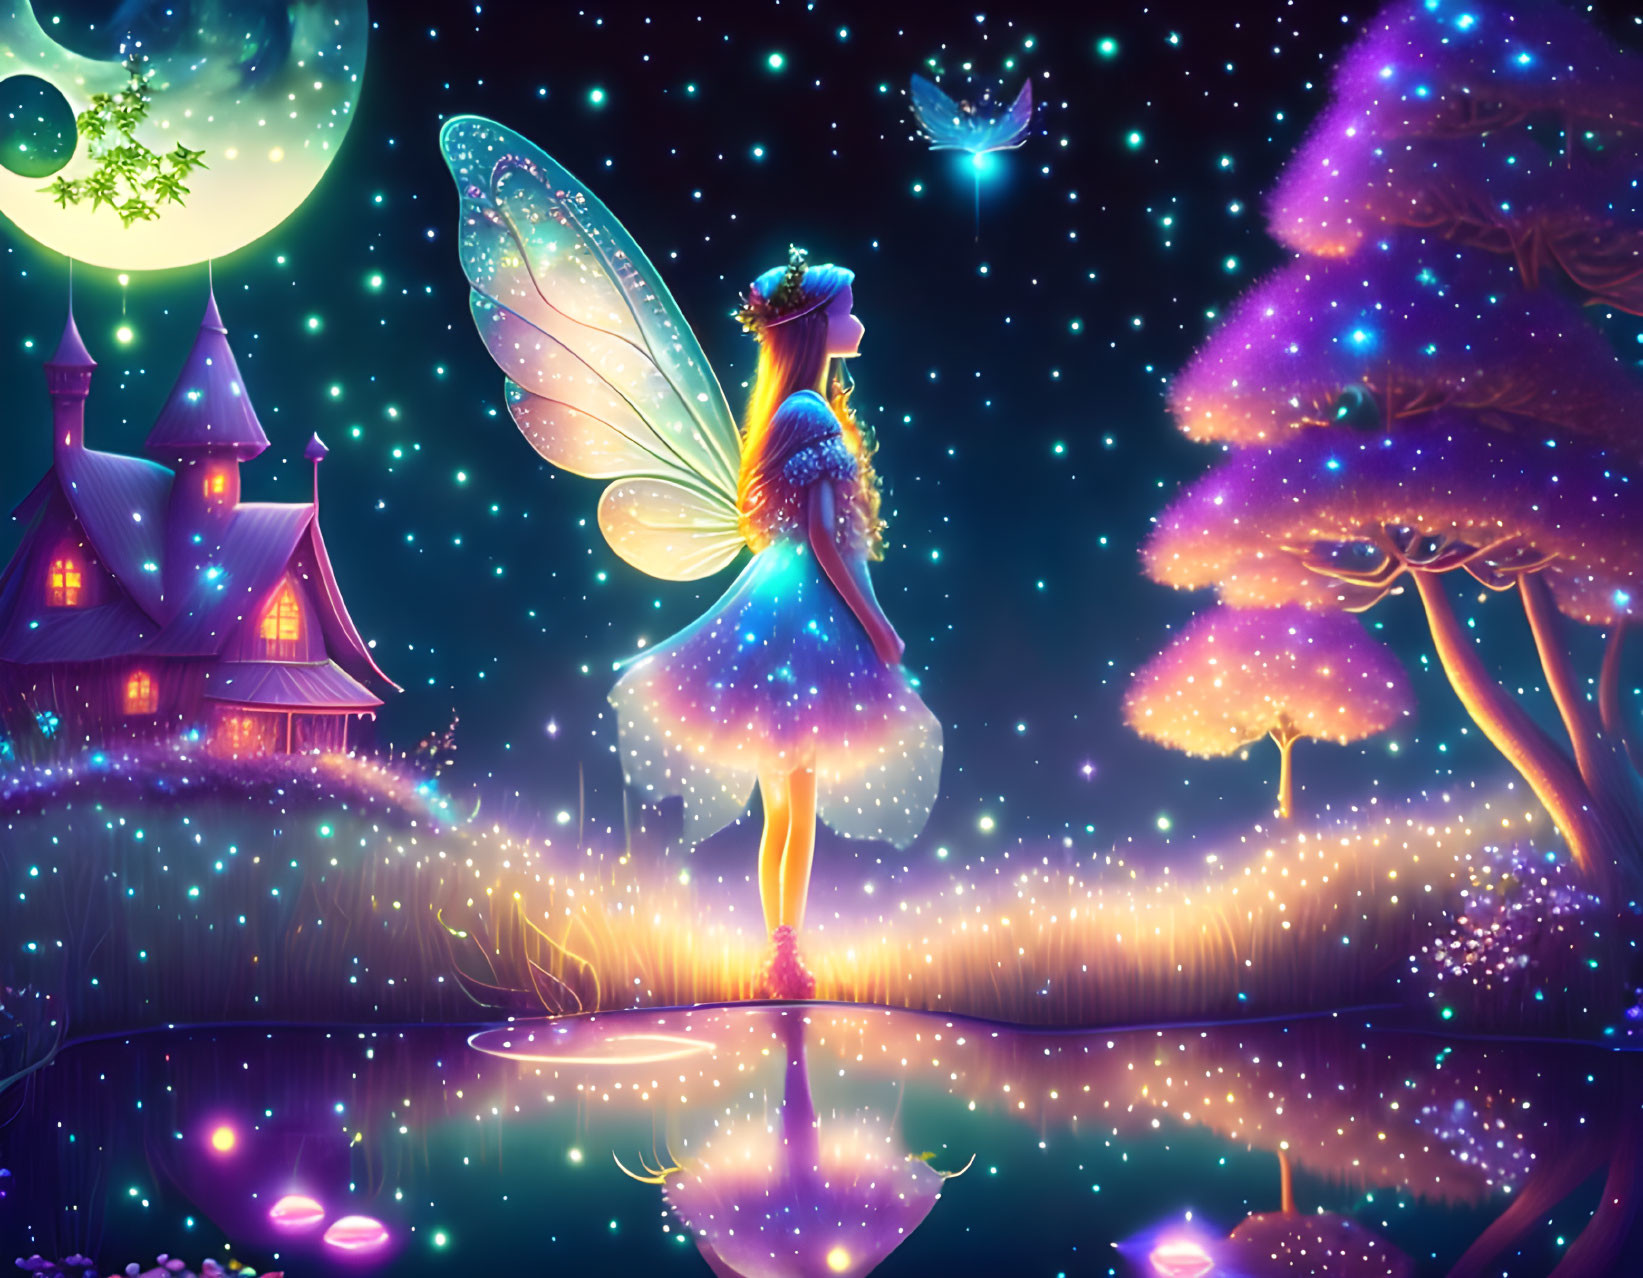 Glowing fairy with iridescent wings by reflective pond